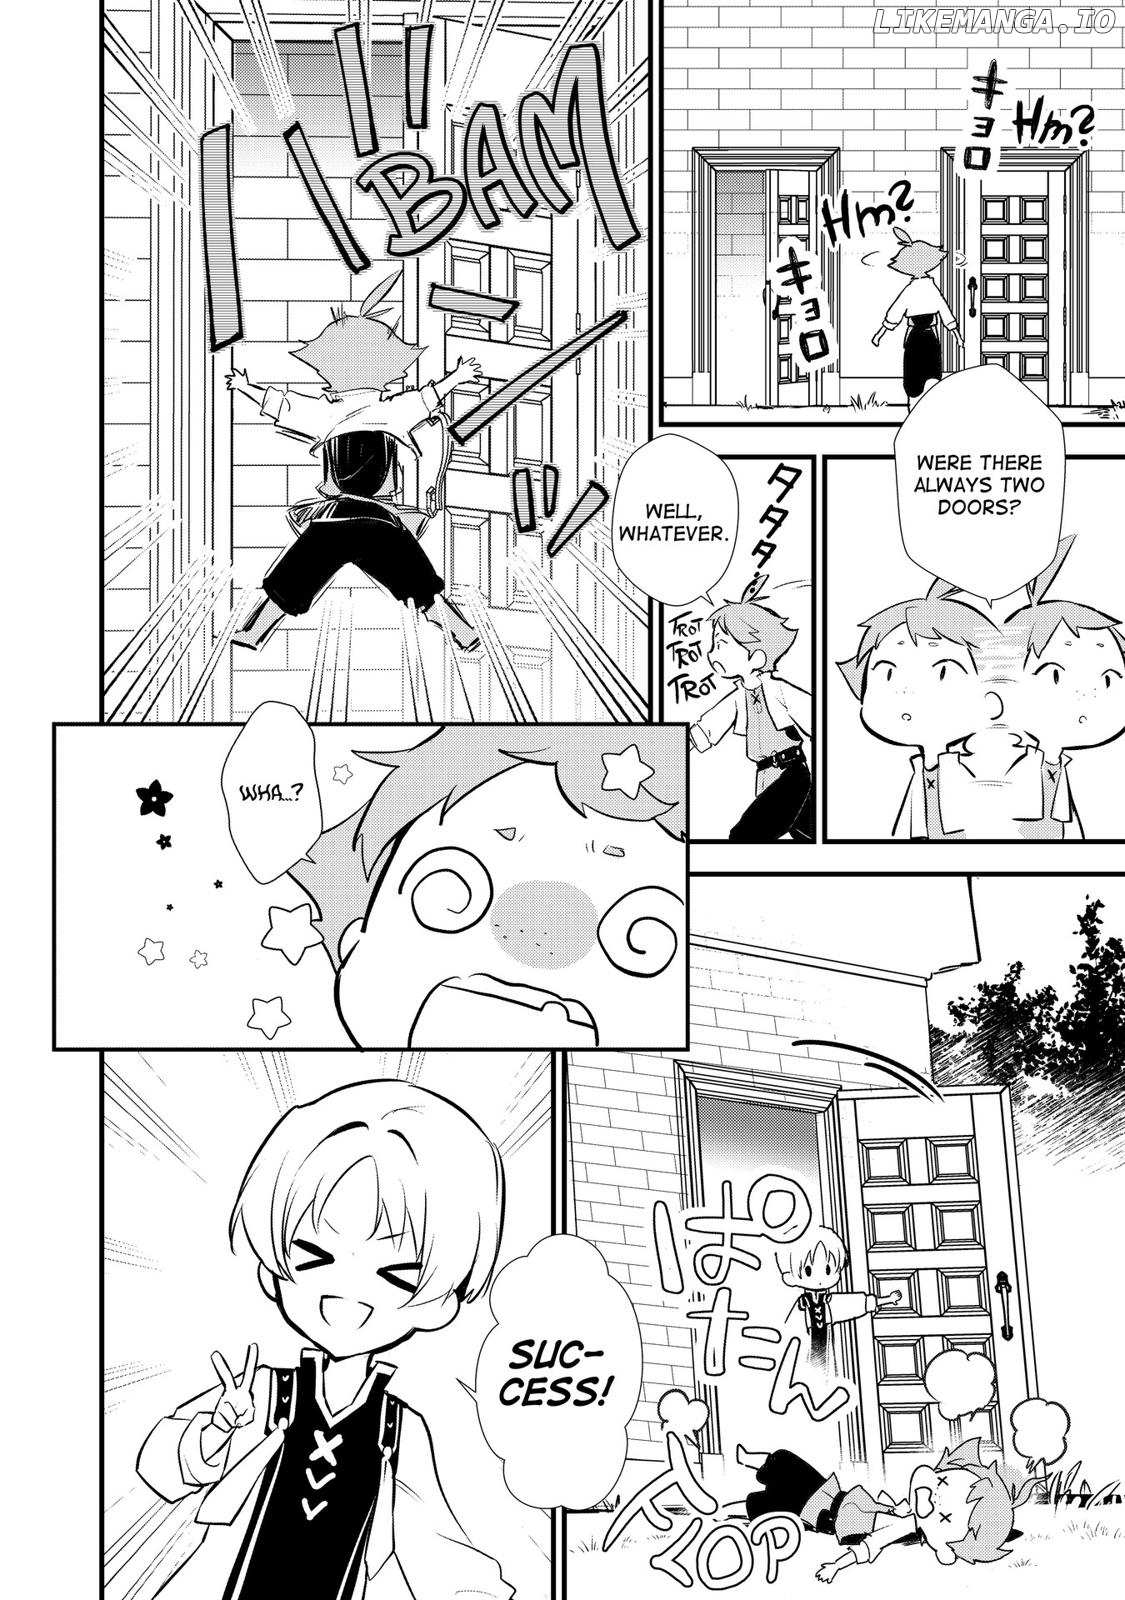 Treat of Reincarnation: The Advent of the Almighty Pastry Chef chapter 10.5 - page 2